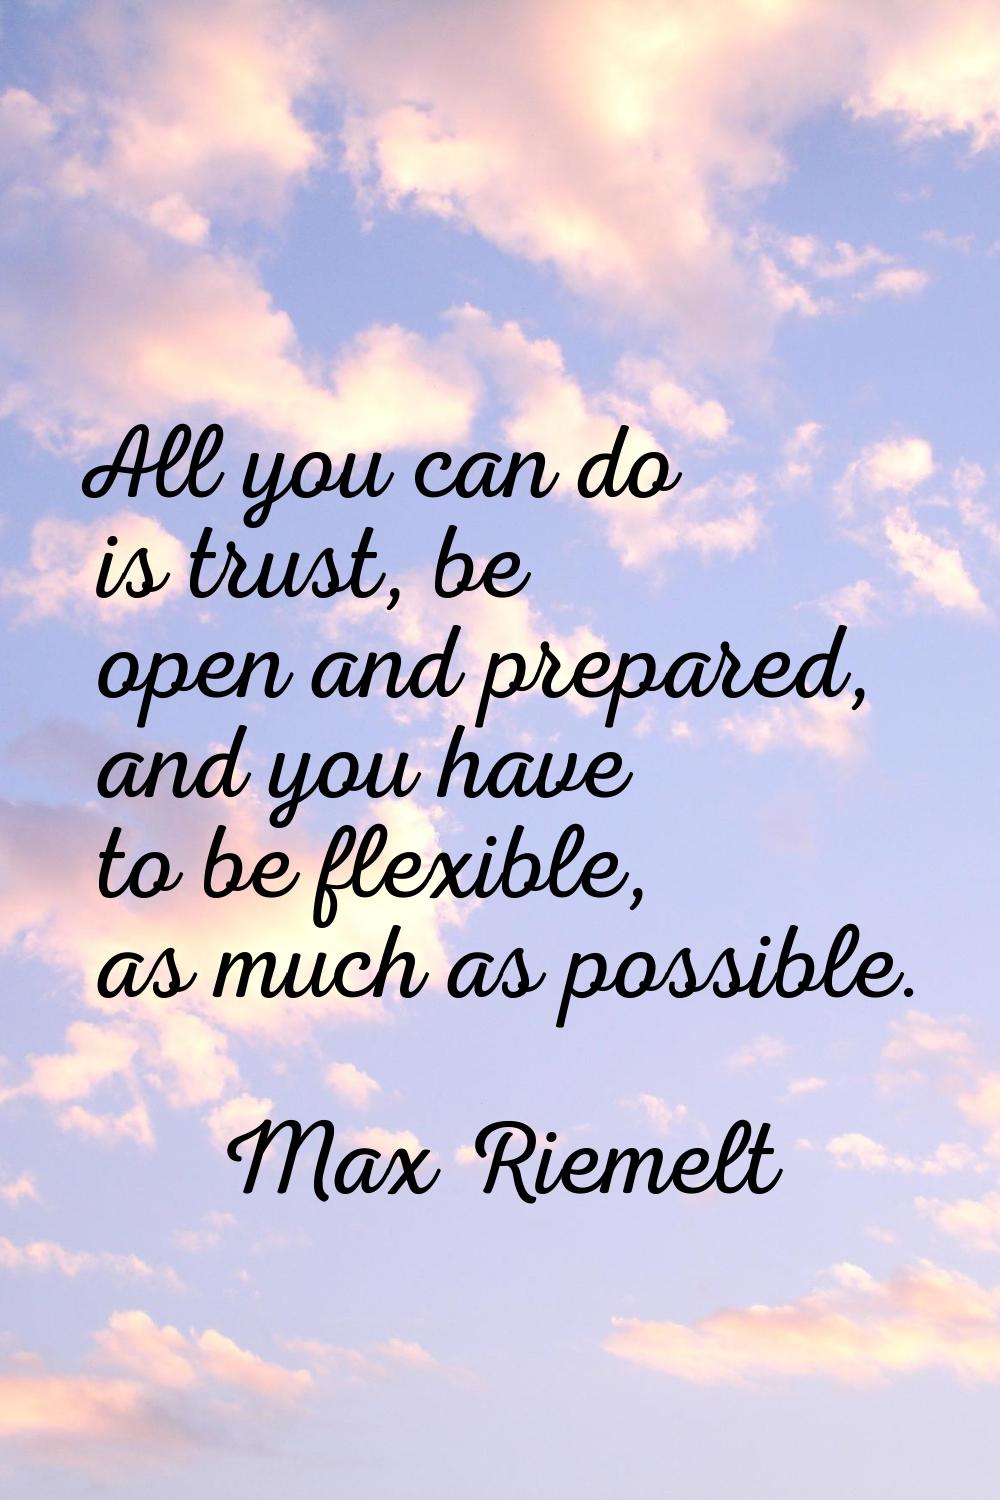 All you can do is trust, be open and prepared, and you have to be flexible, as much as possible.